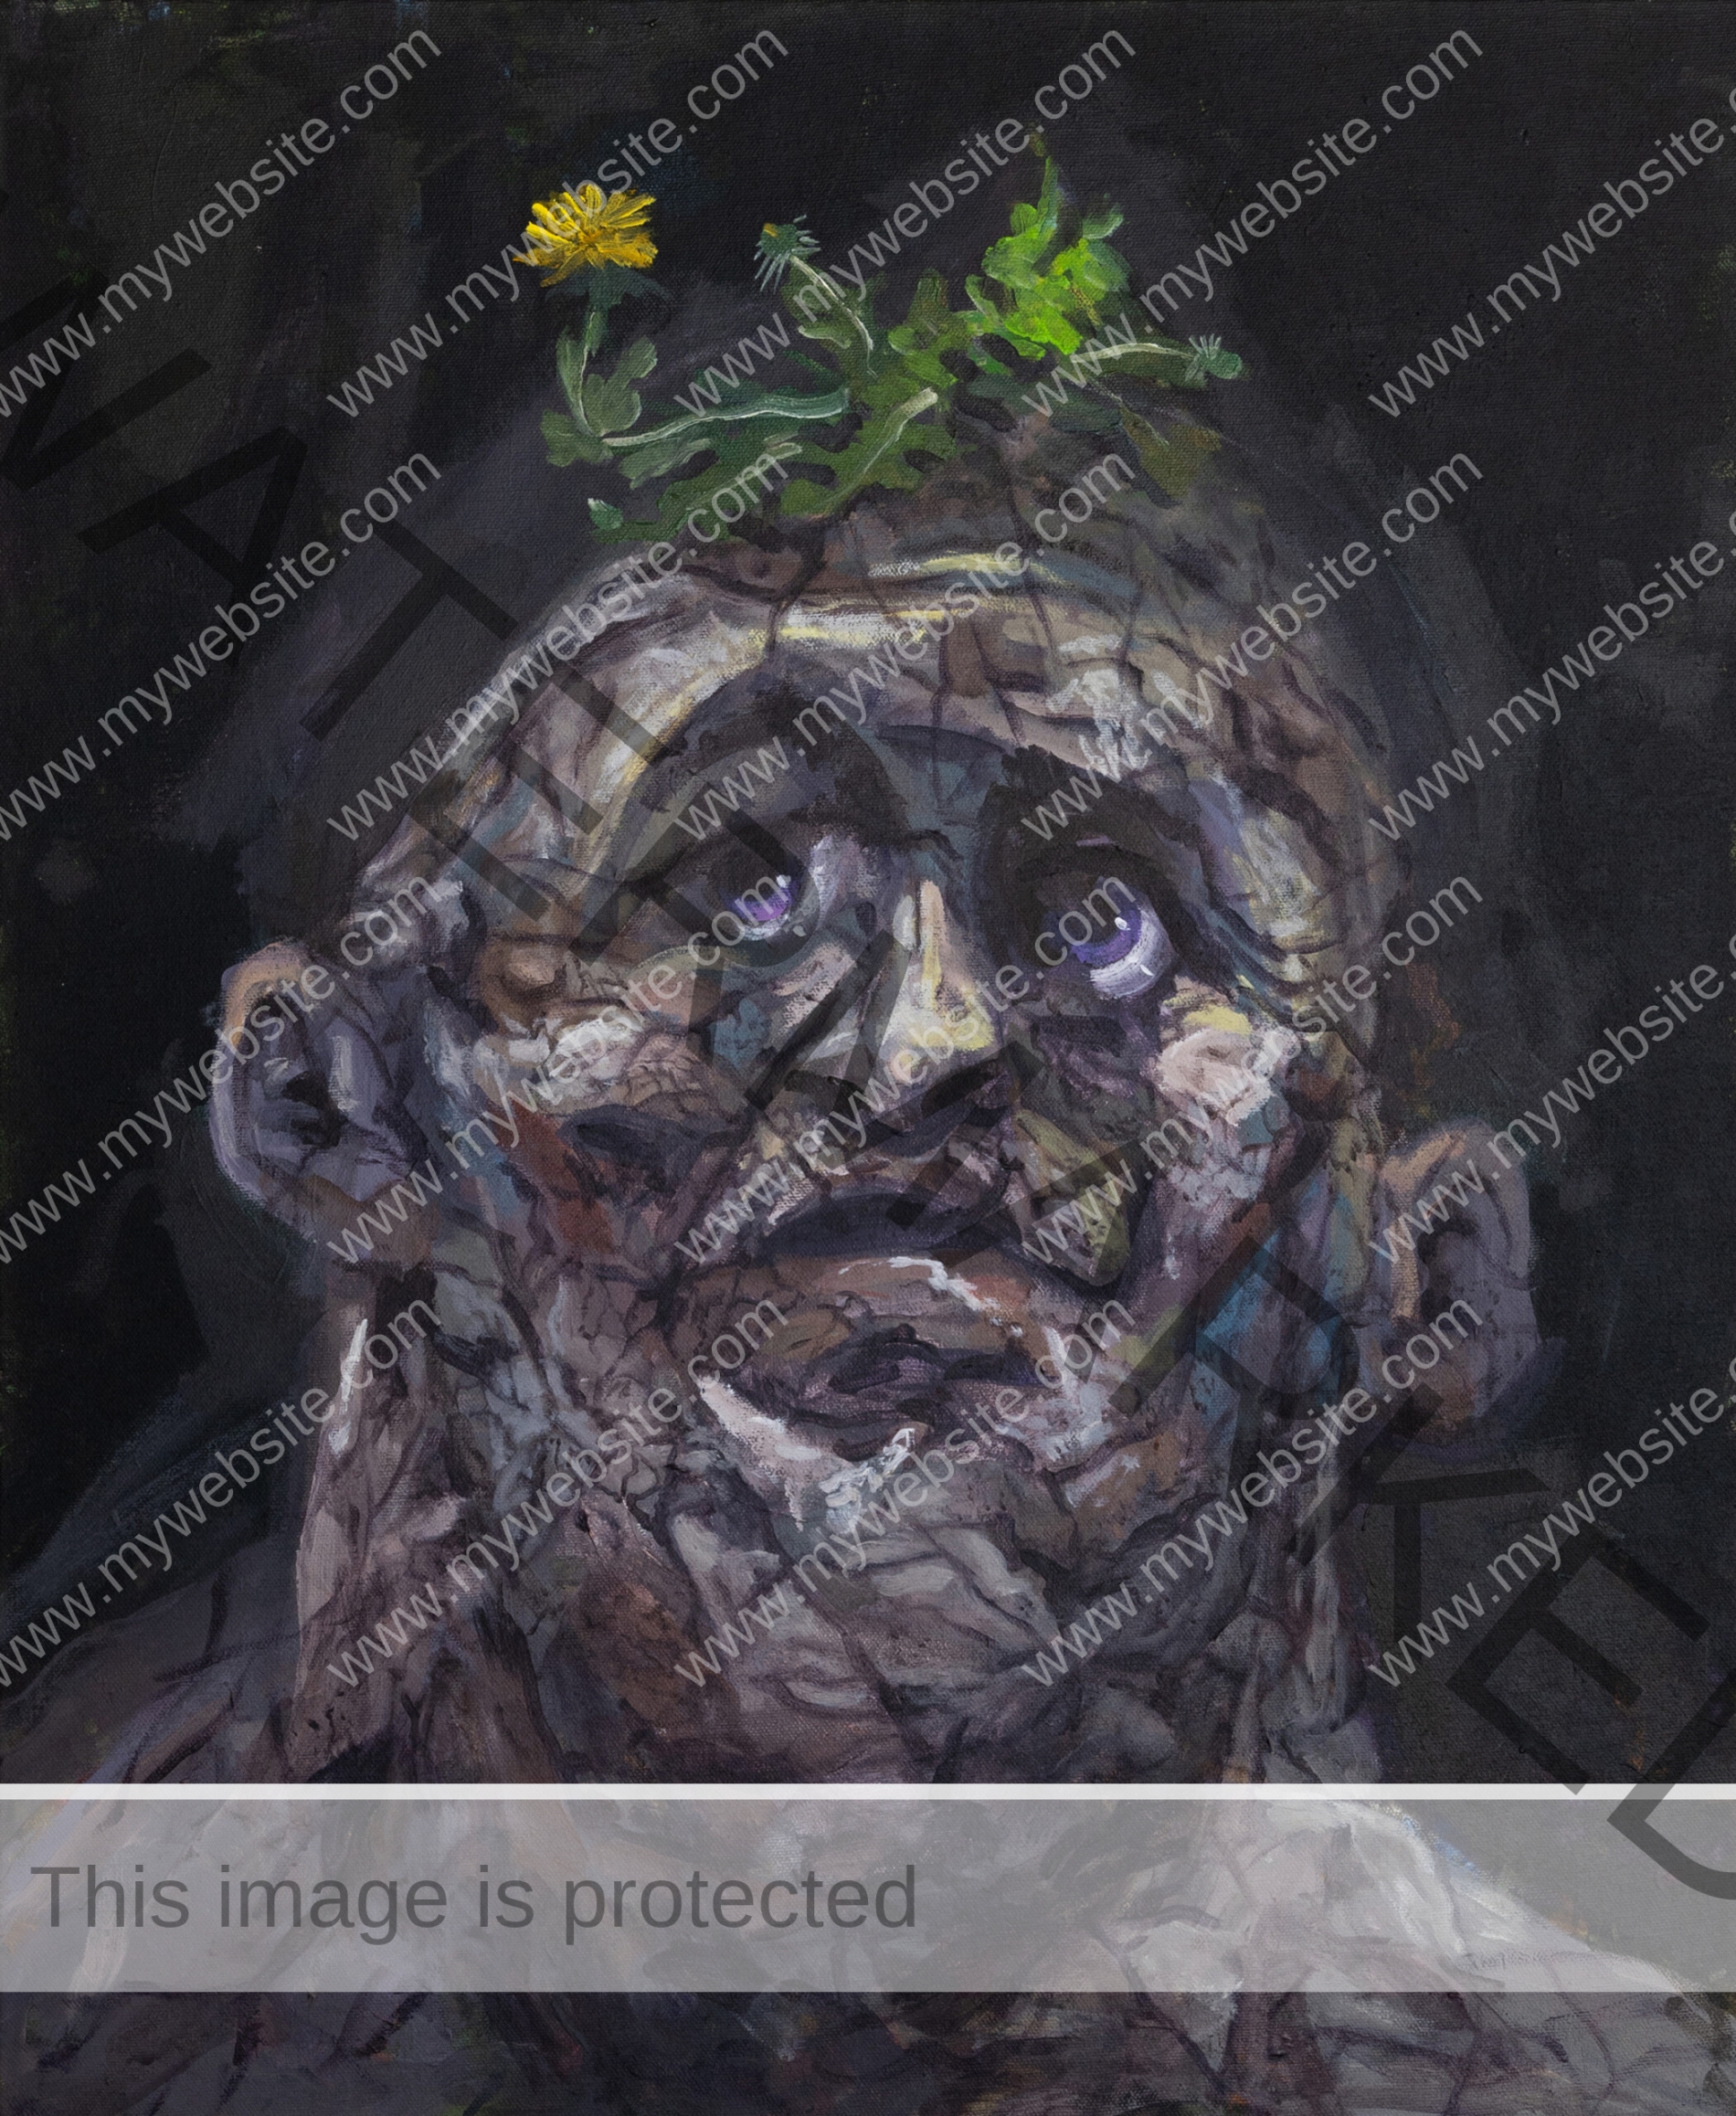 Acrylic on canvas painting, man of stone with a flower growing out of his head. man of stone painting